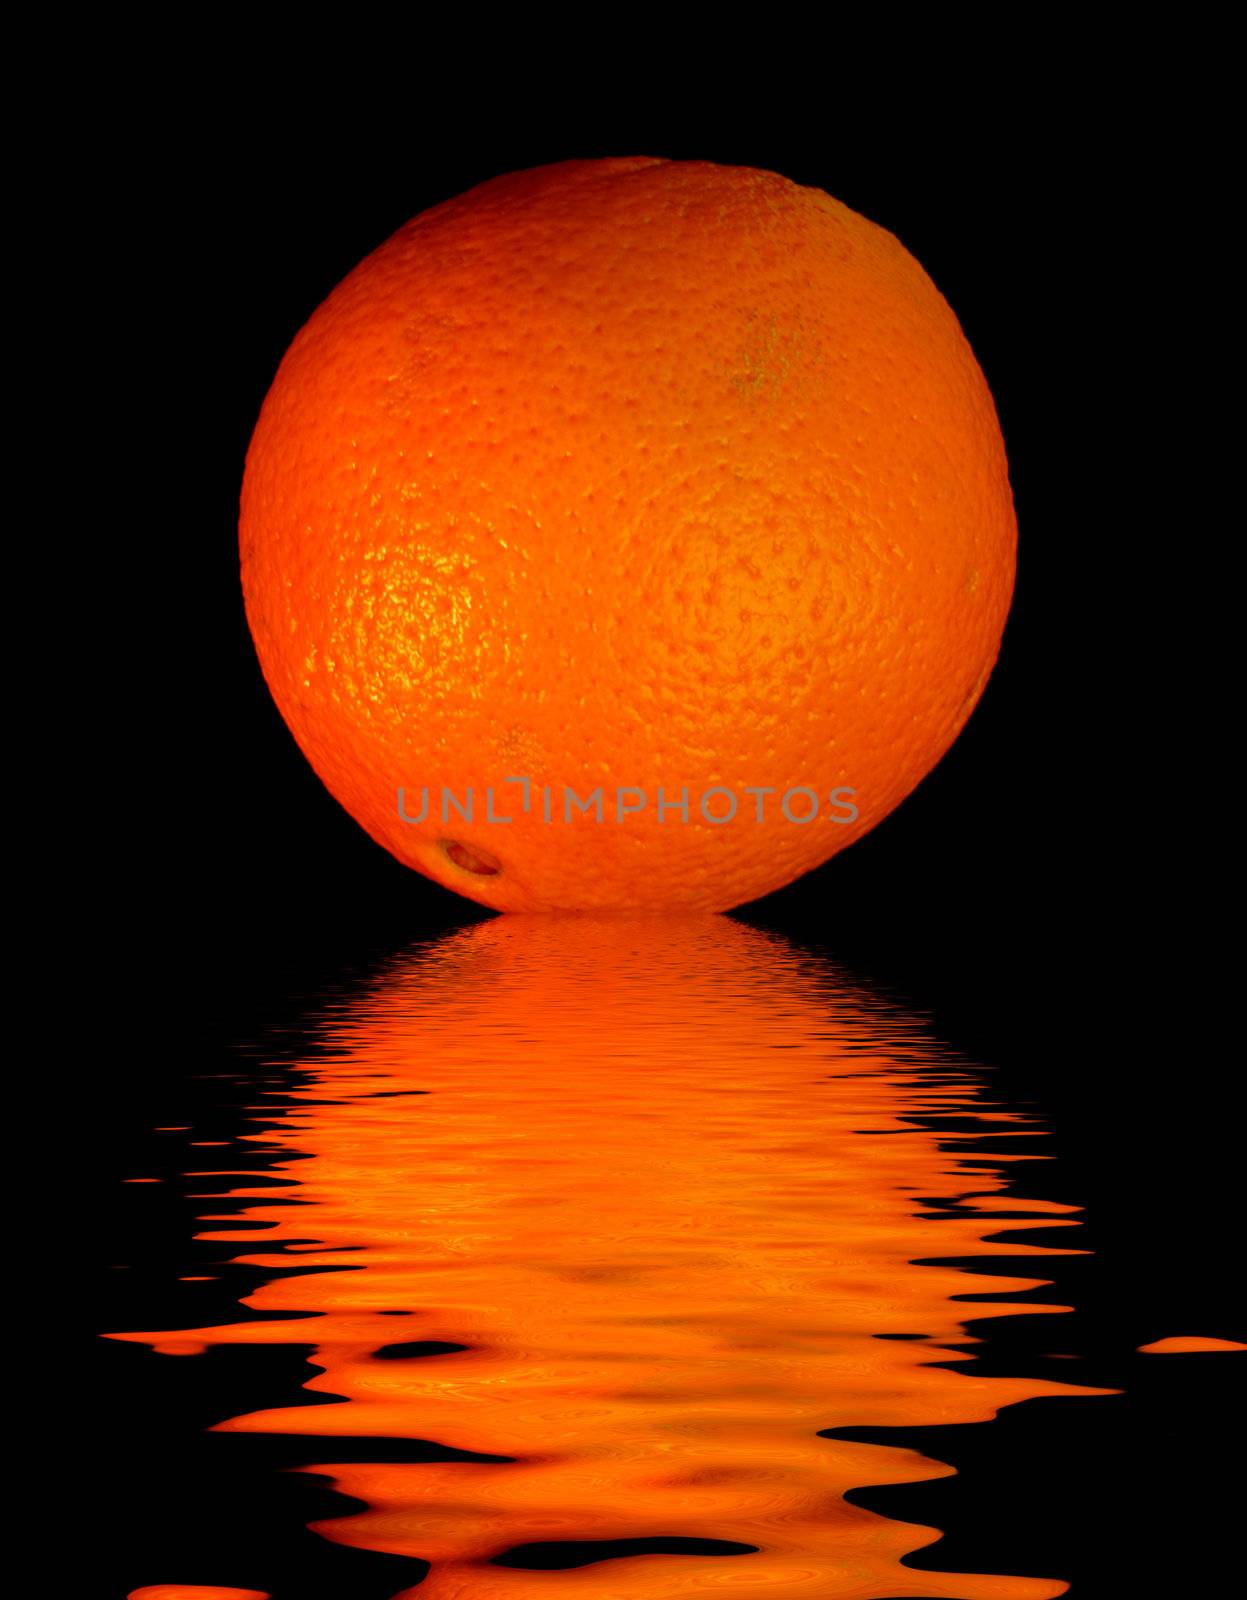 colored orange -  on black with reflection in water